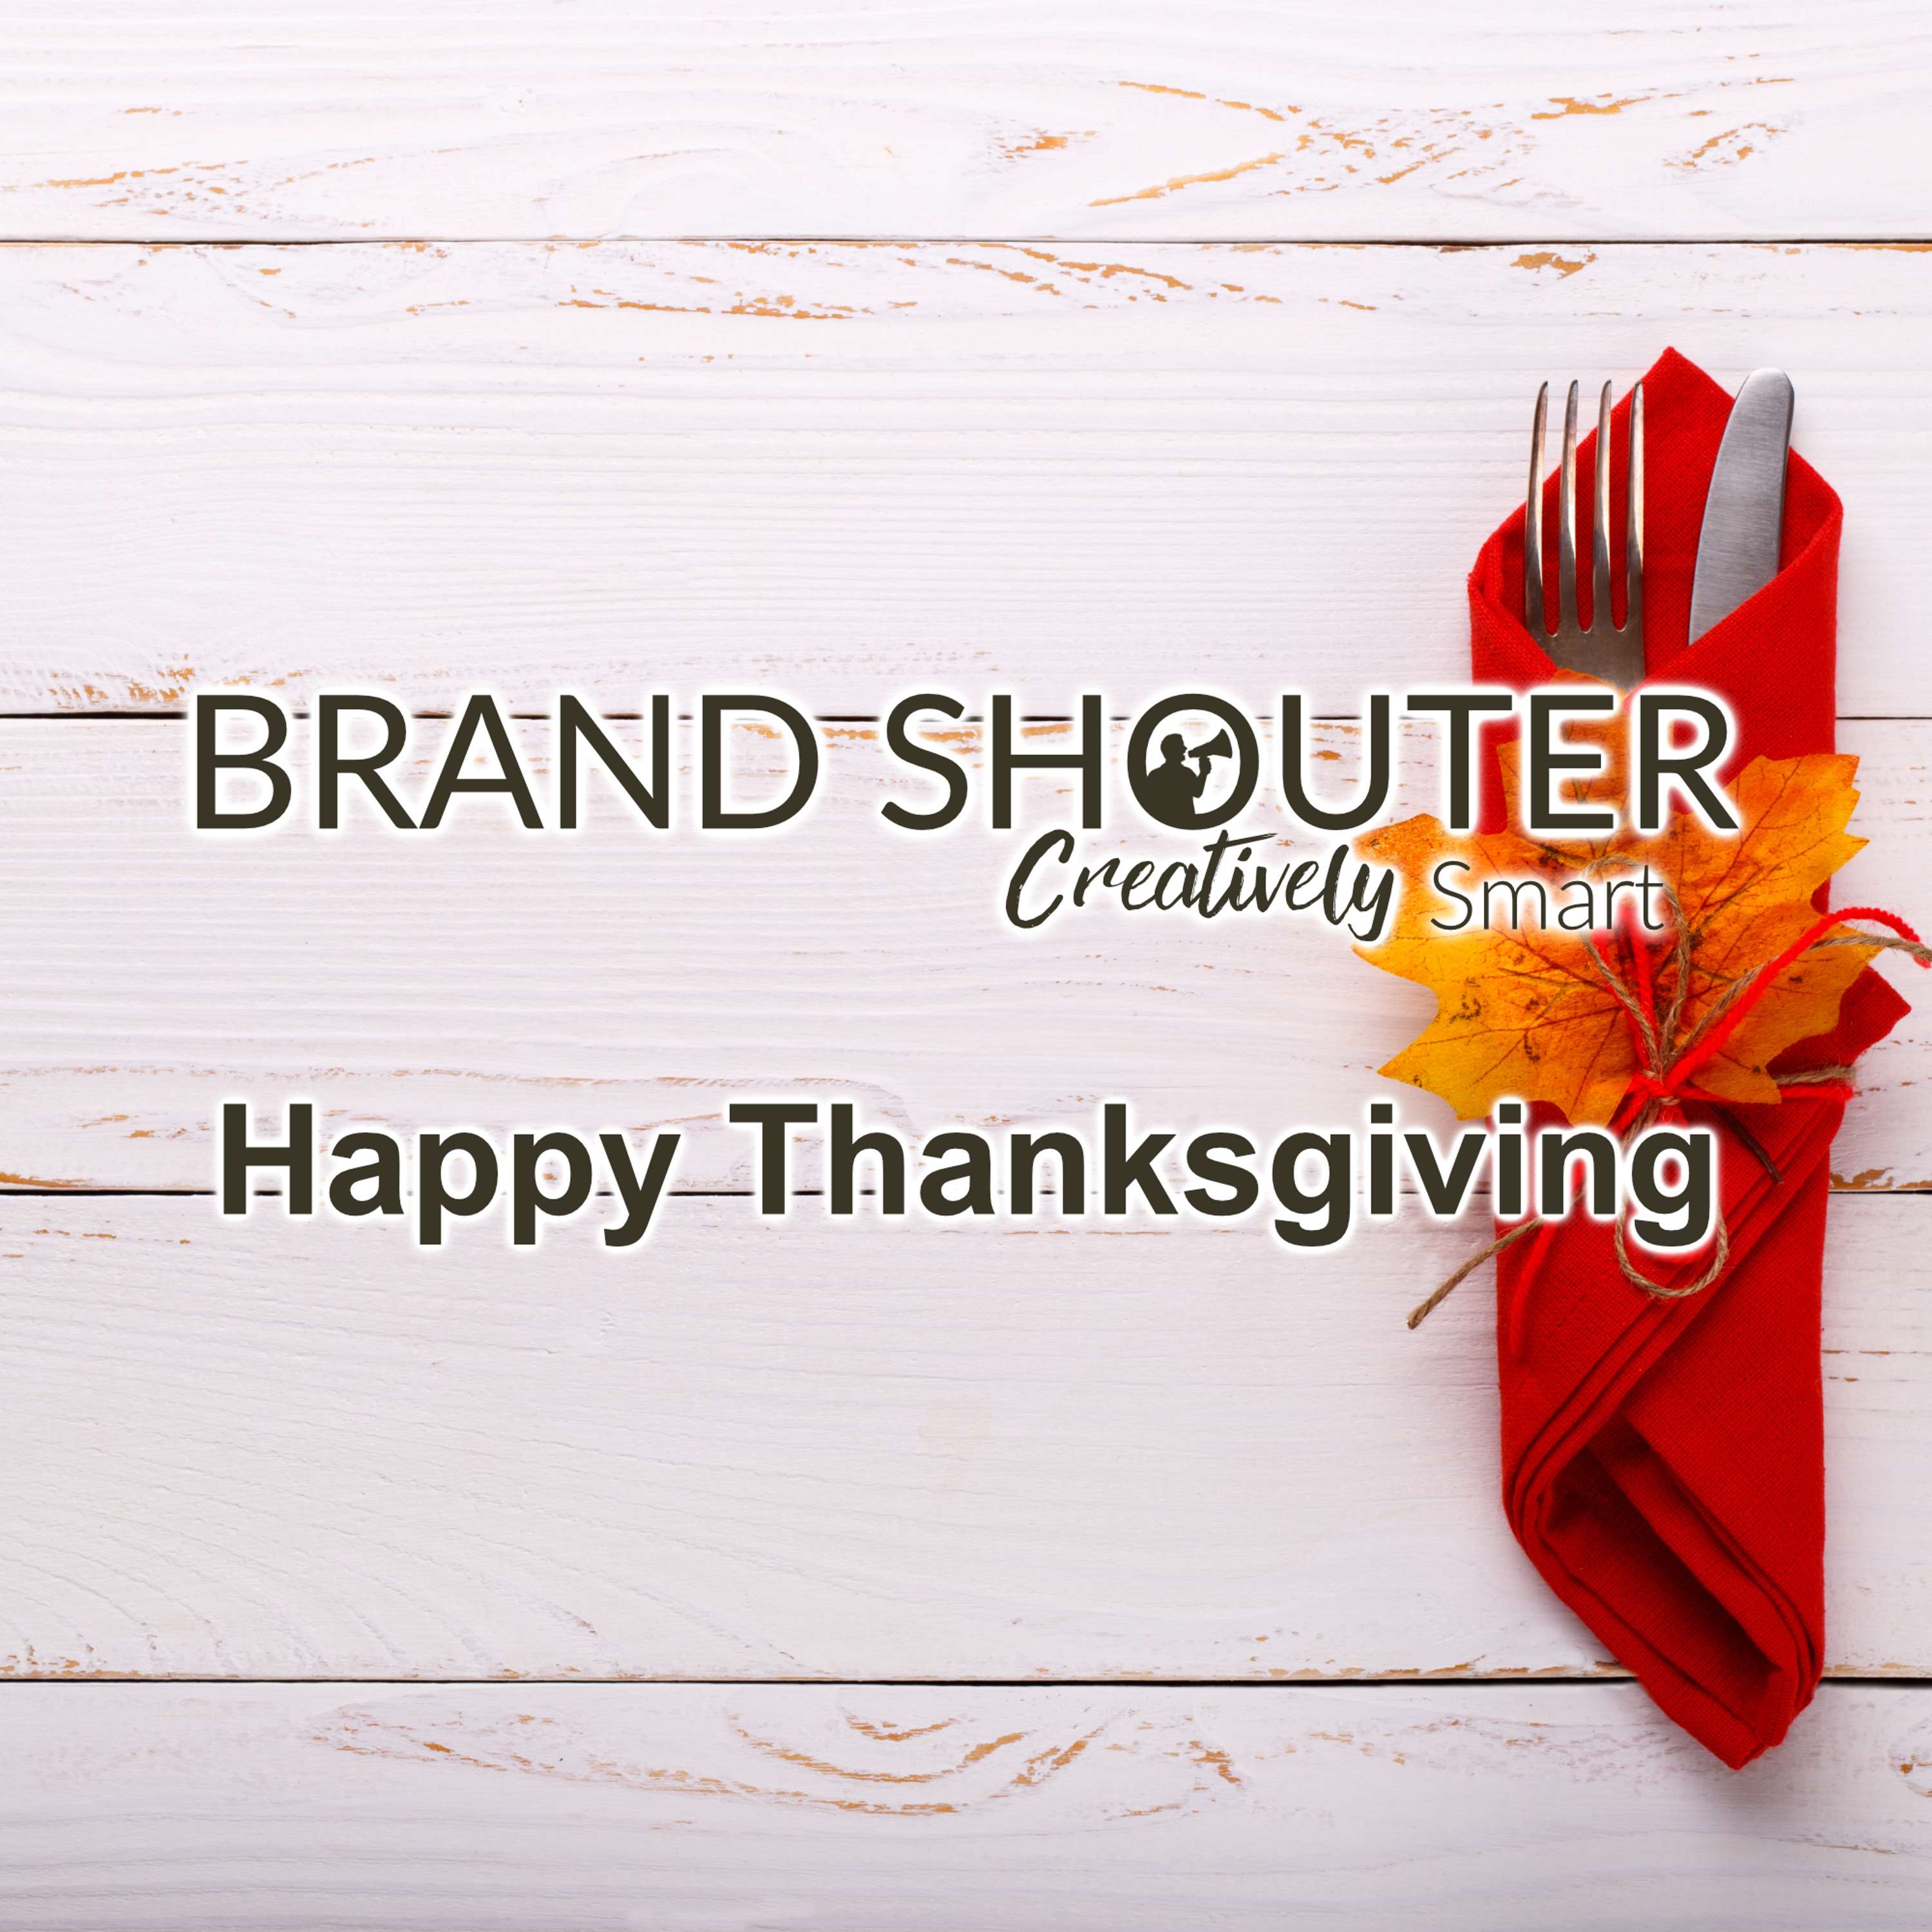 Happy Thanksgiving From Brand Shouter